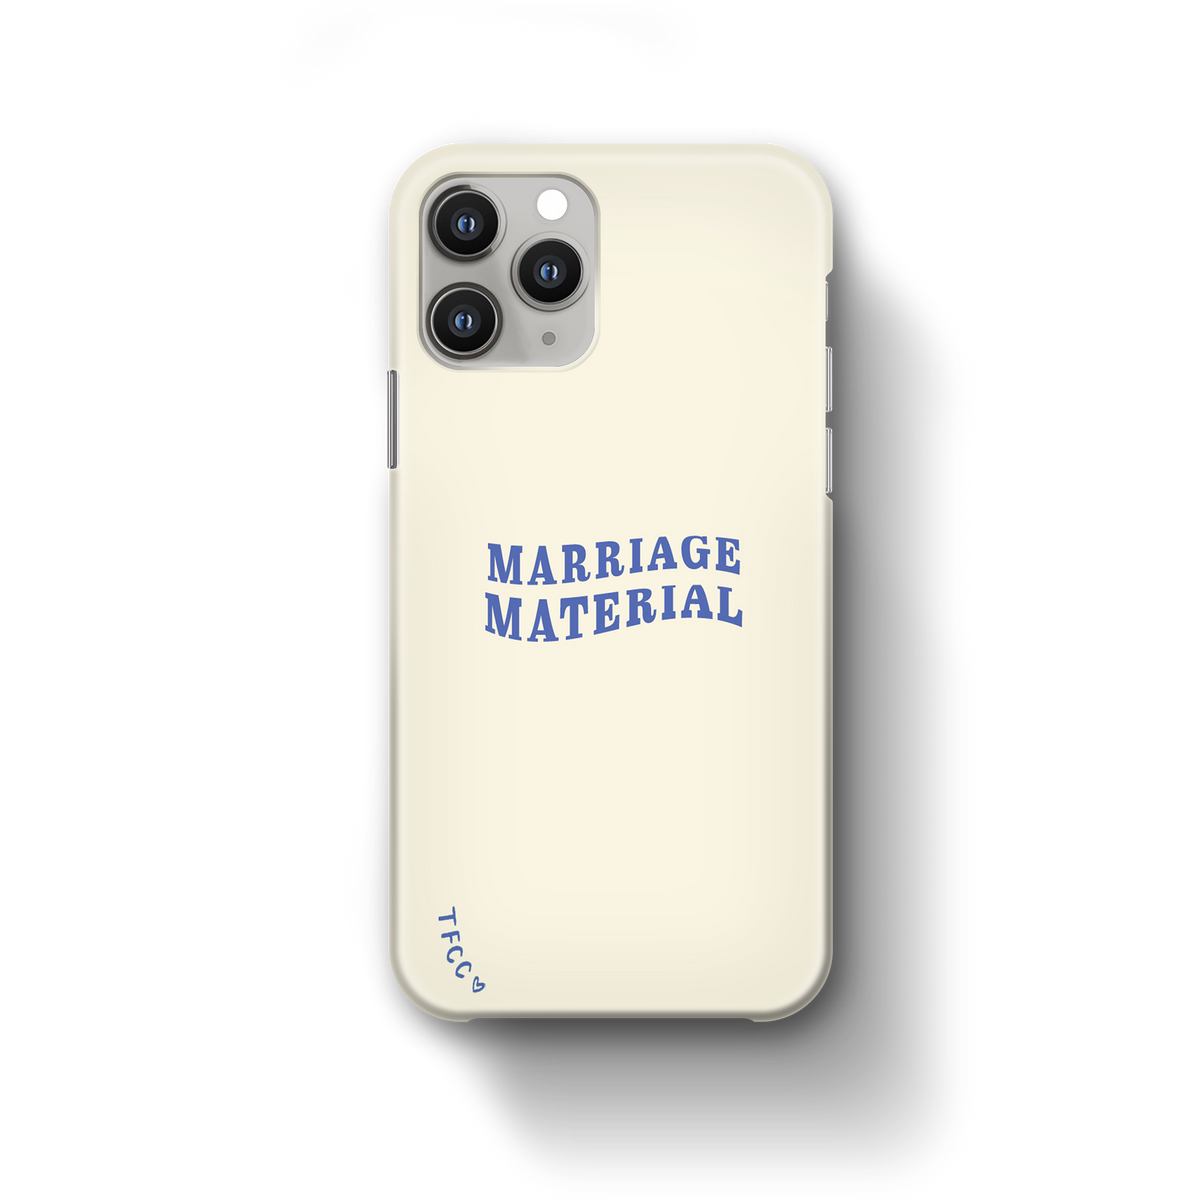 MARRIAGE MATERIAL CASE - thefonecasecompany